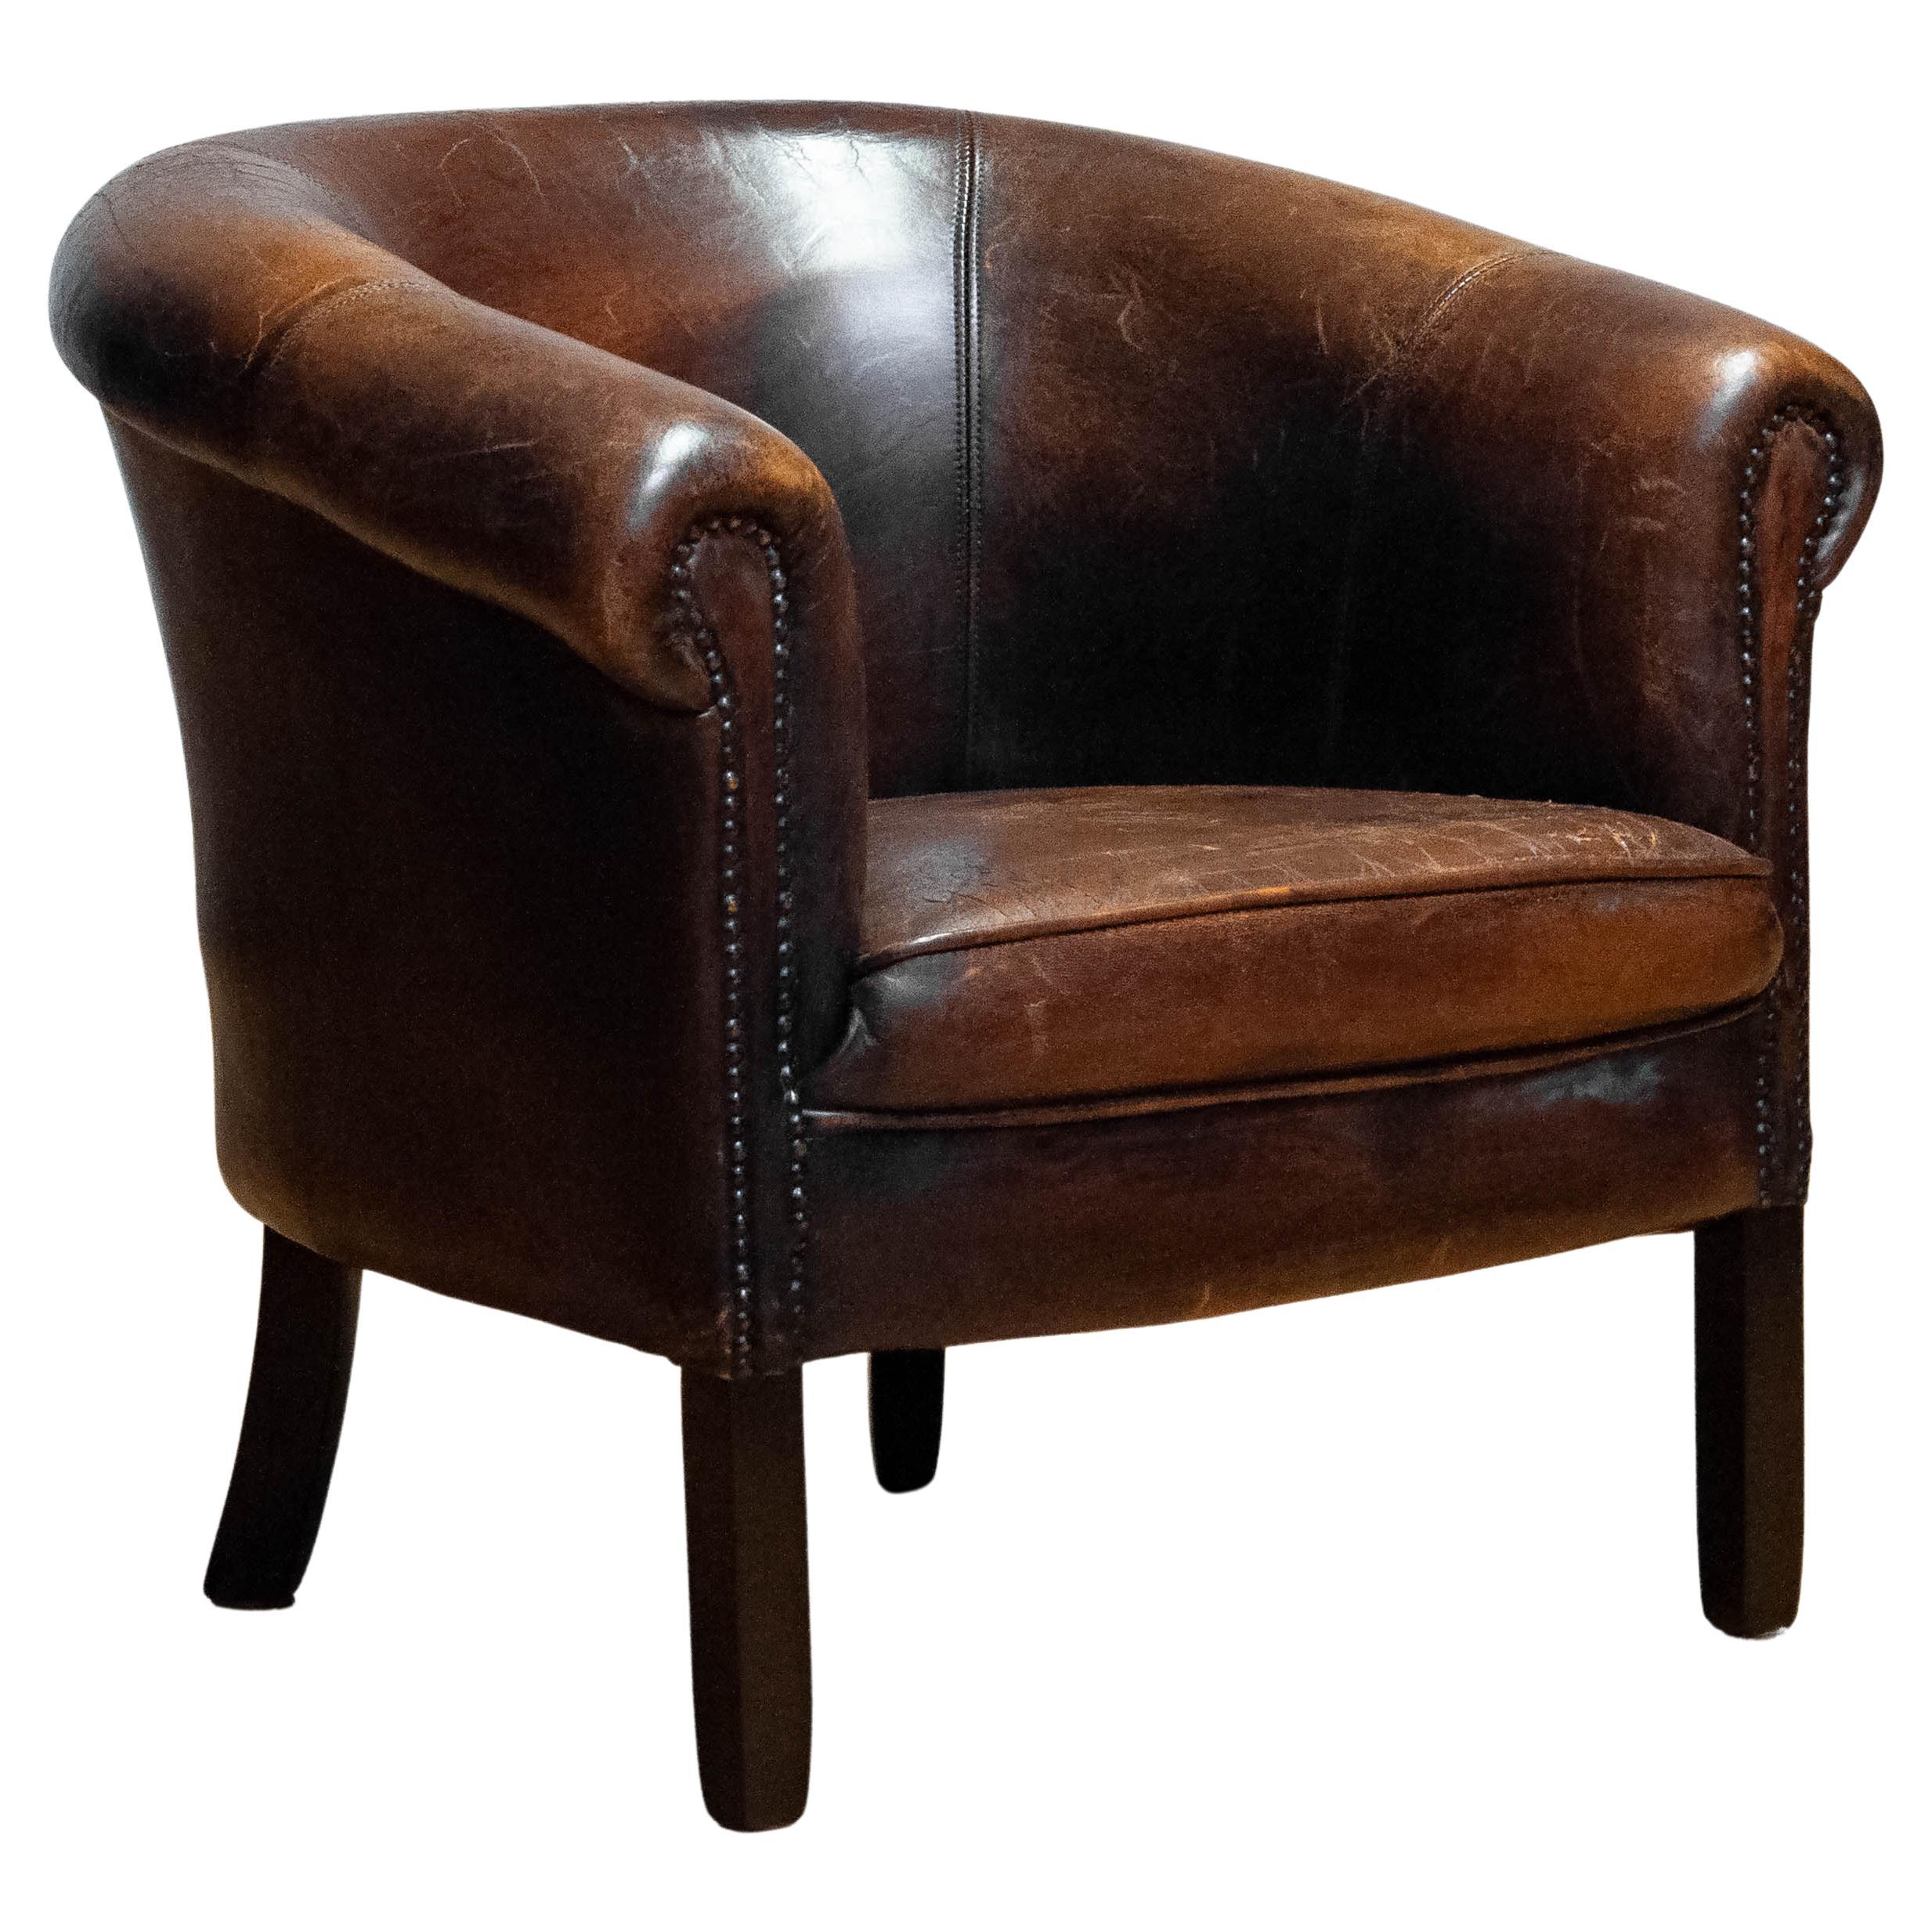 Characteristic and extremely decorative Dutch colonial arm chair upholstered with dark brown patinated tan sheepskin. Allover in good and comfortable condition and supports great.

Please note!
Because Shipping Costs highly fluctuate daily, we